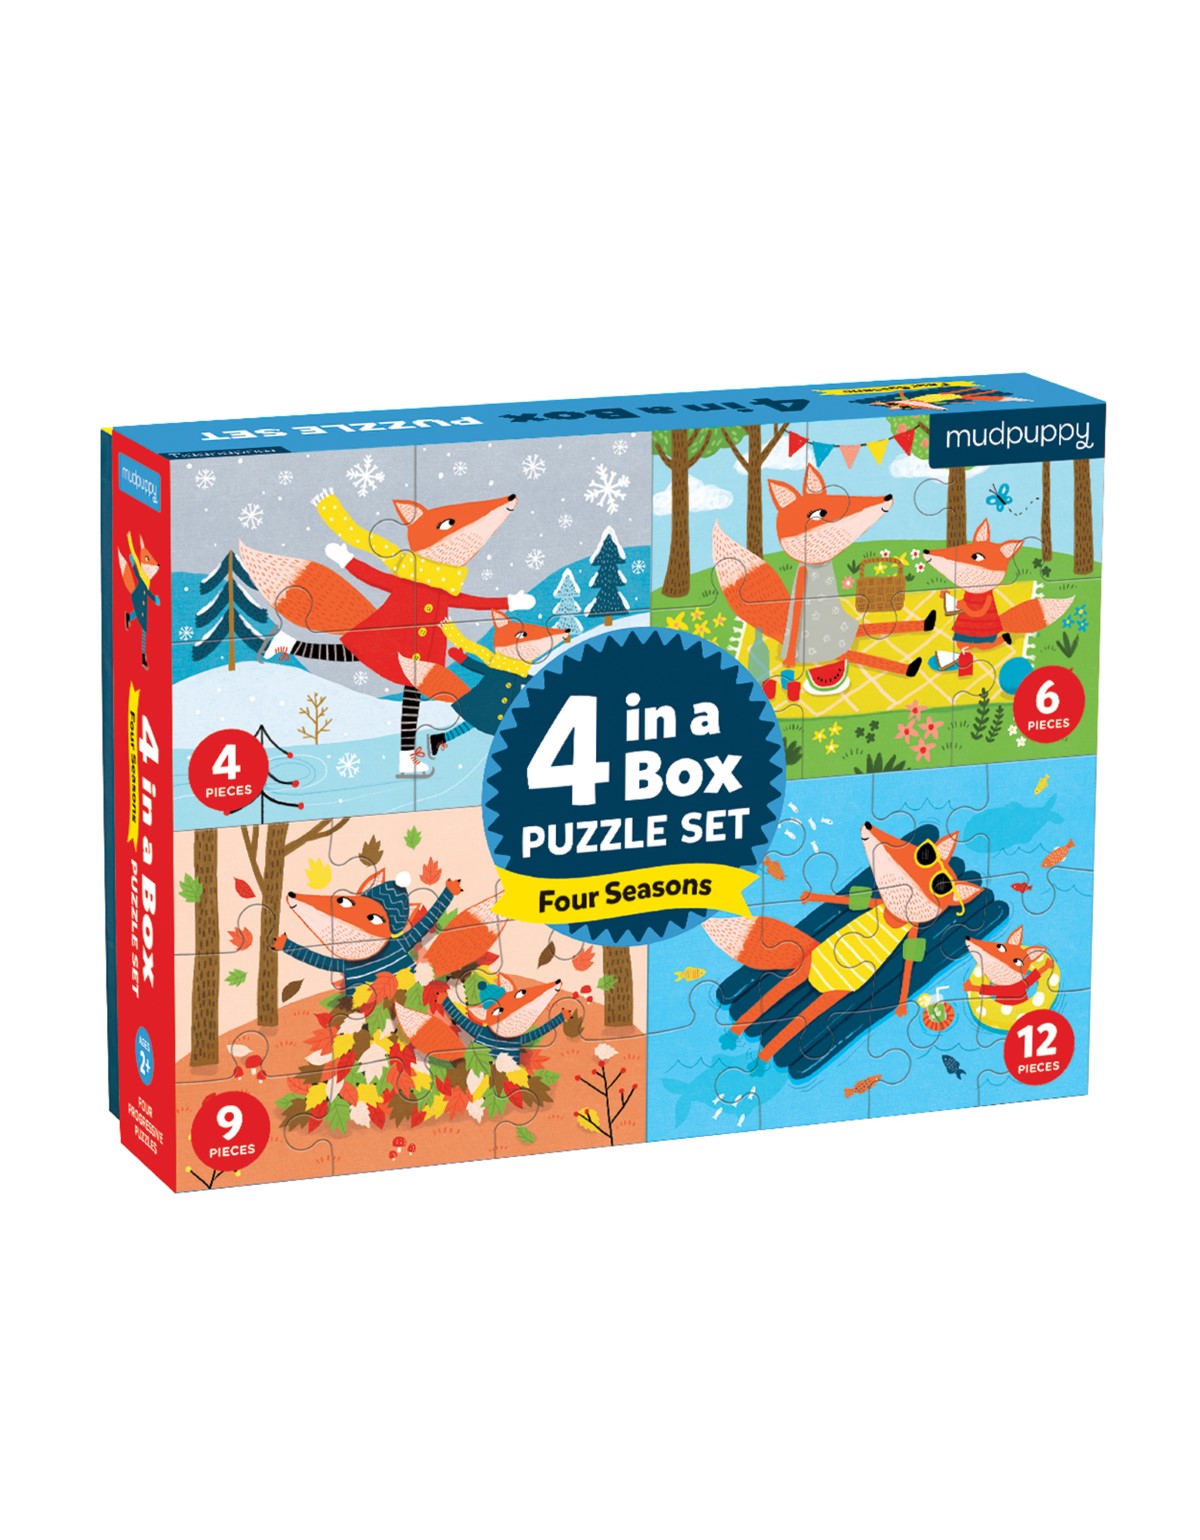 Mudpuppy Four Seasons 4-in-a-box Puzzle Set